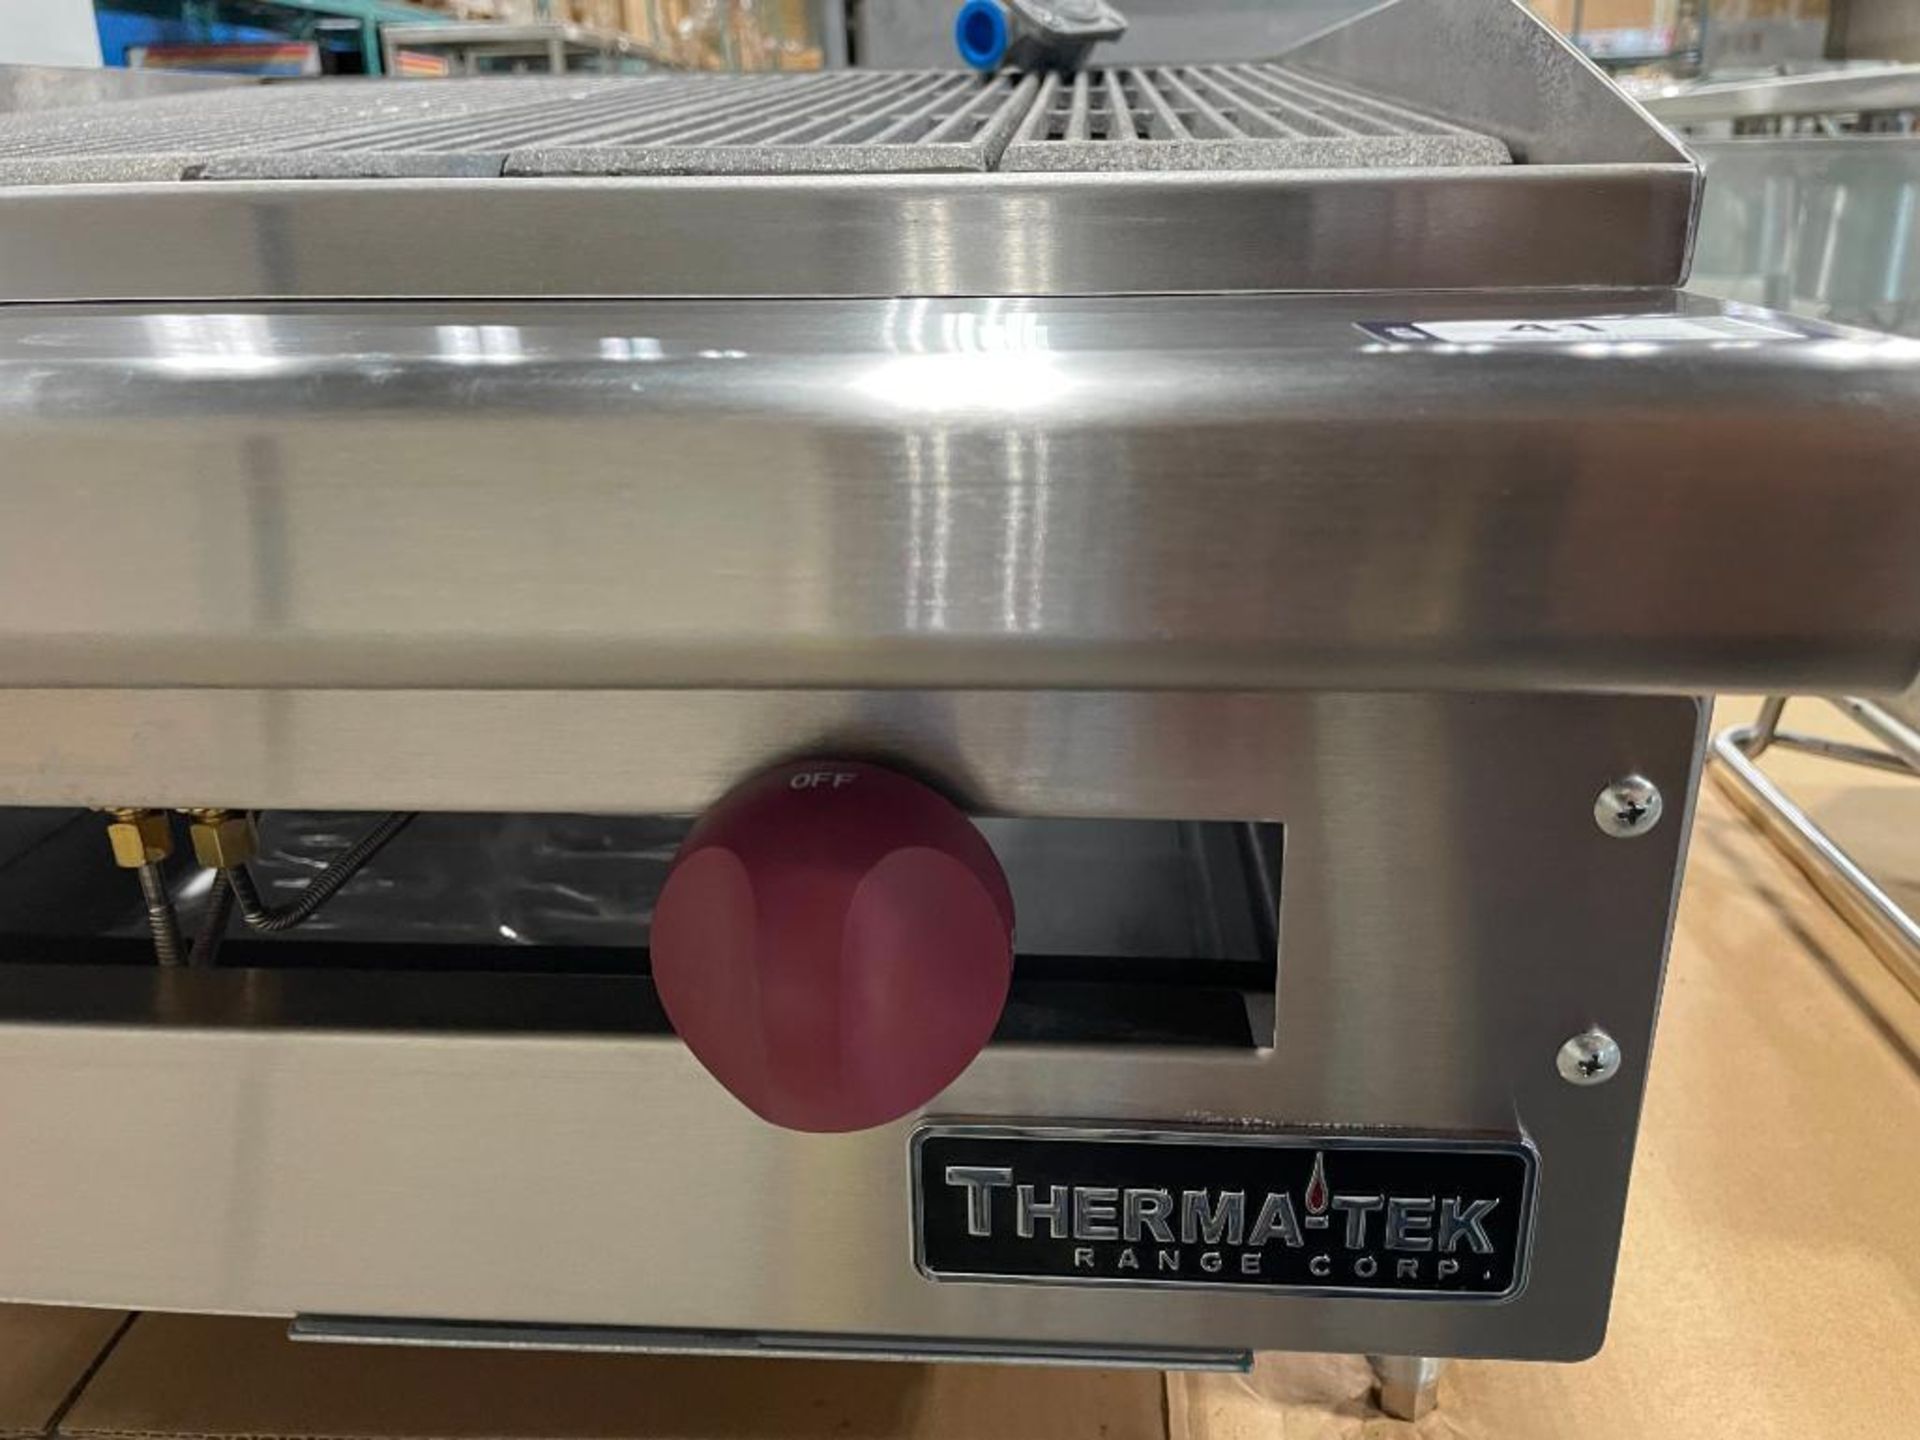 NEW THERMA-TEK TC24-24RBN 24" RADIANT CHARBROILER - Image 7 of 13